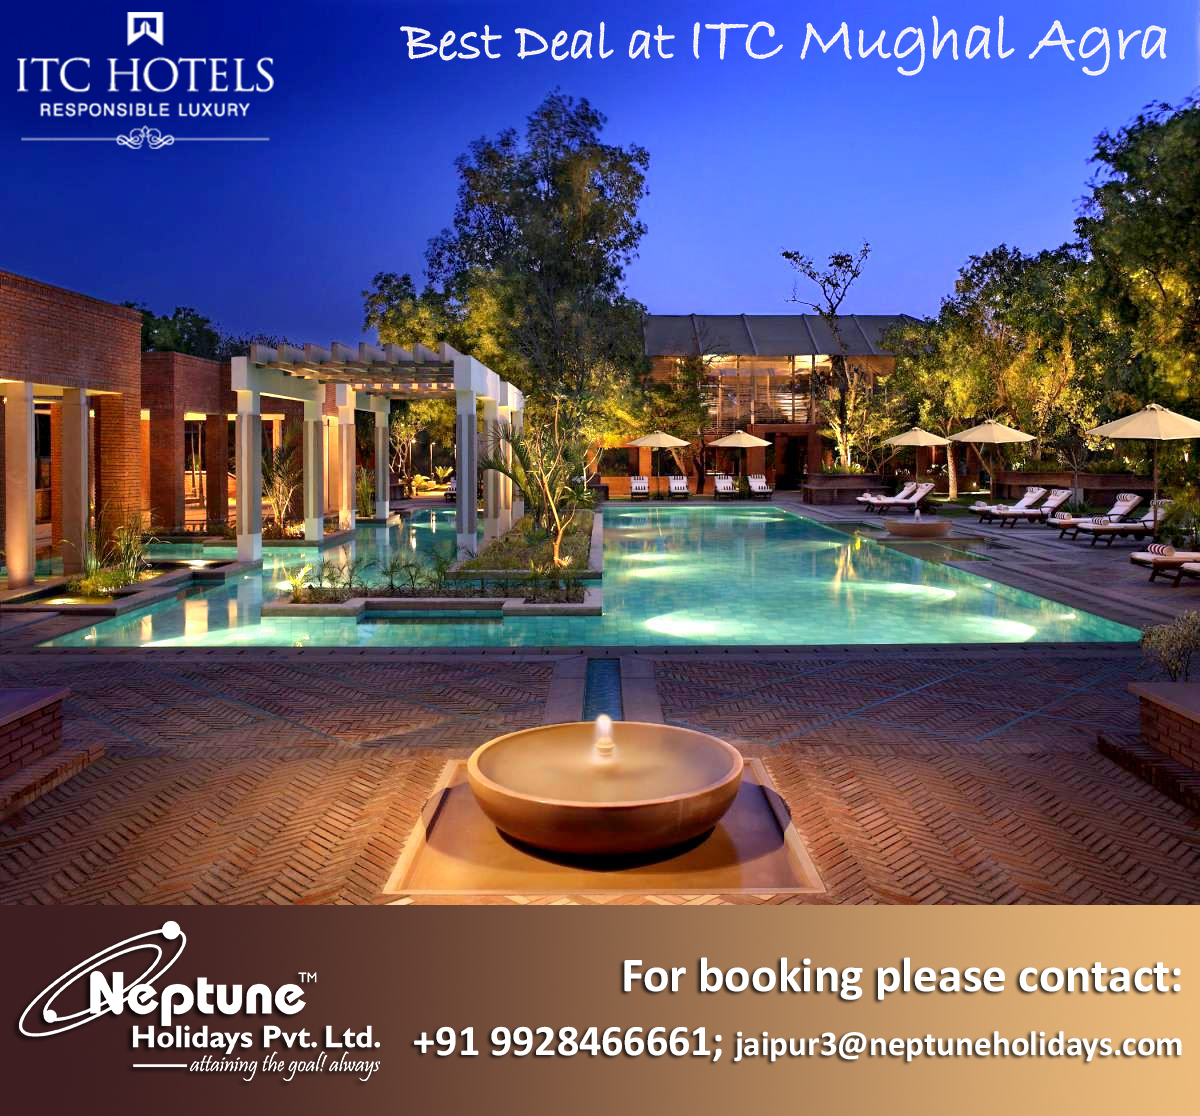 Lowest Rate guaranteed at ITC Mughal Agra